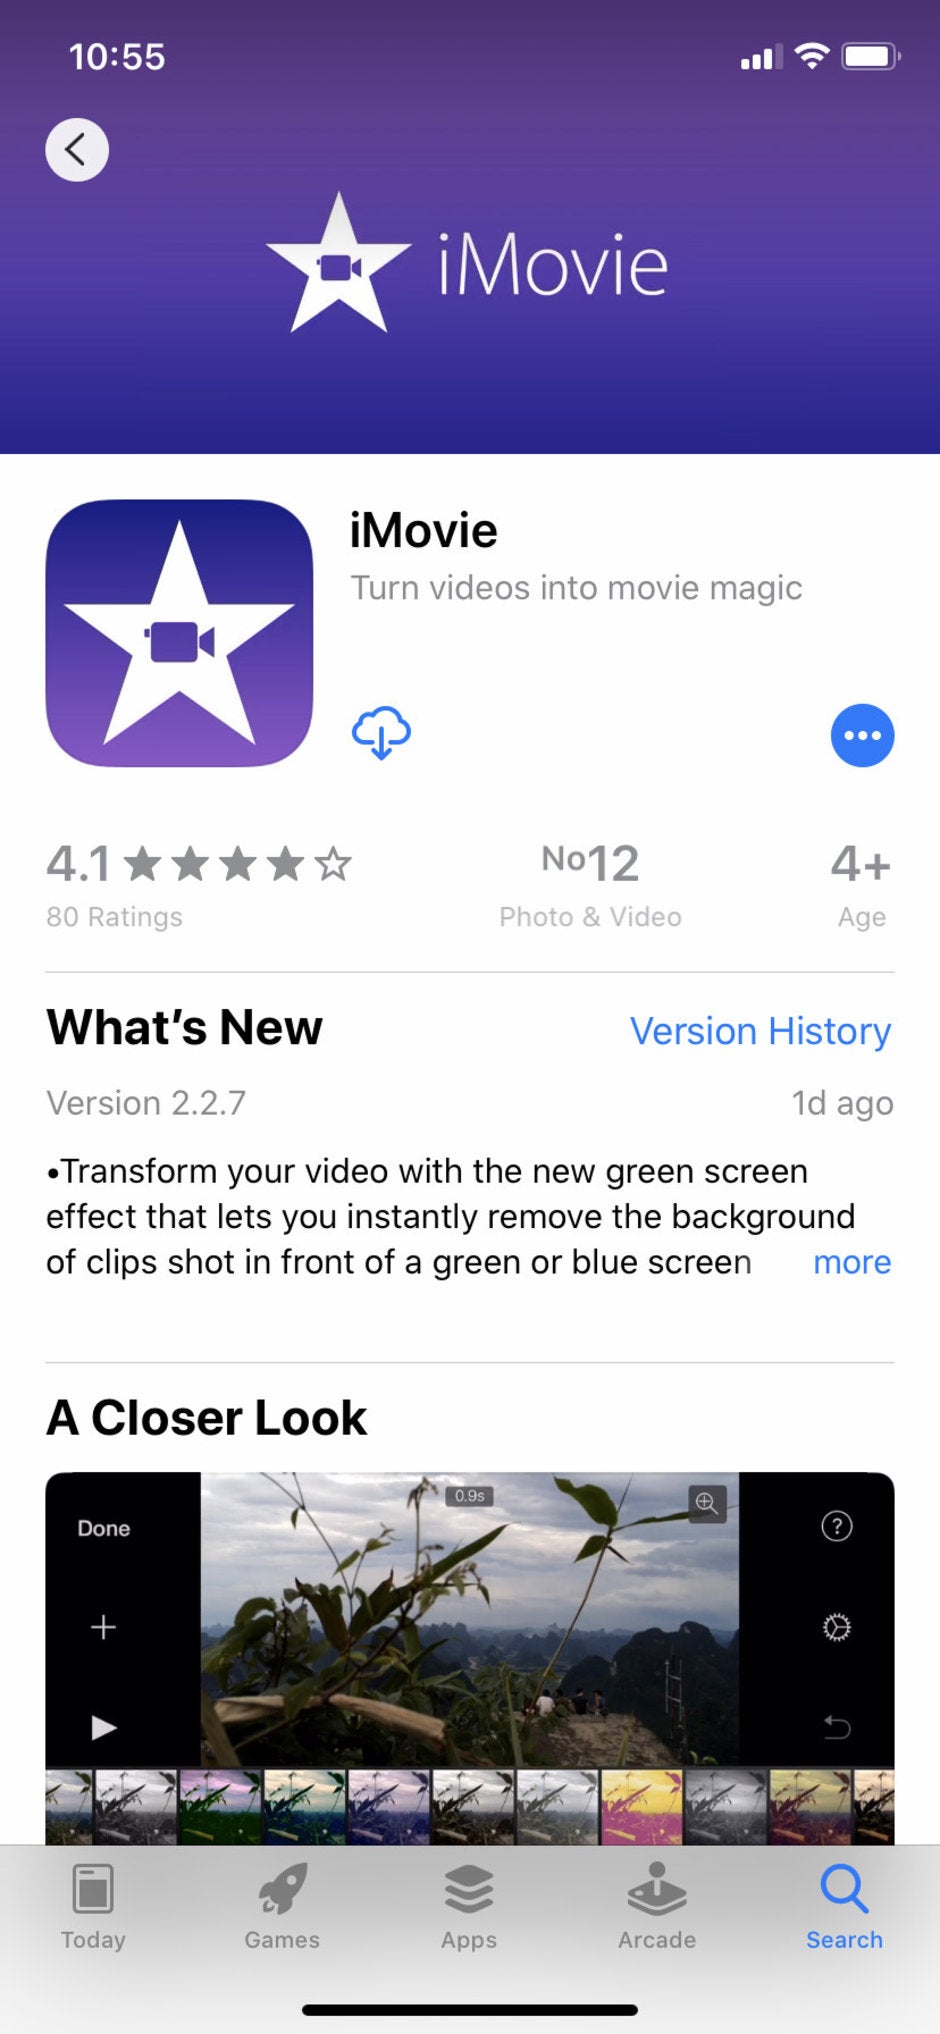 iMovie for iOS now has a green screen feature